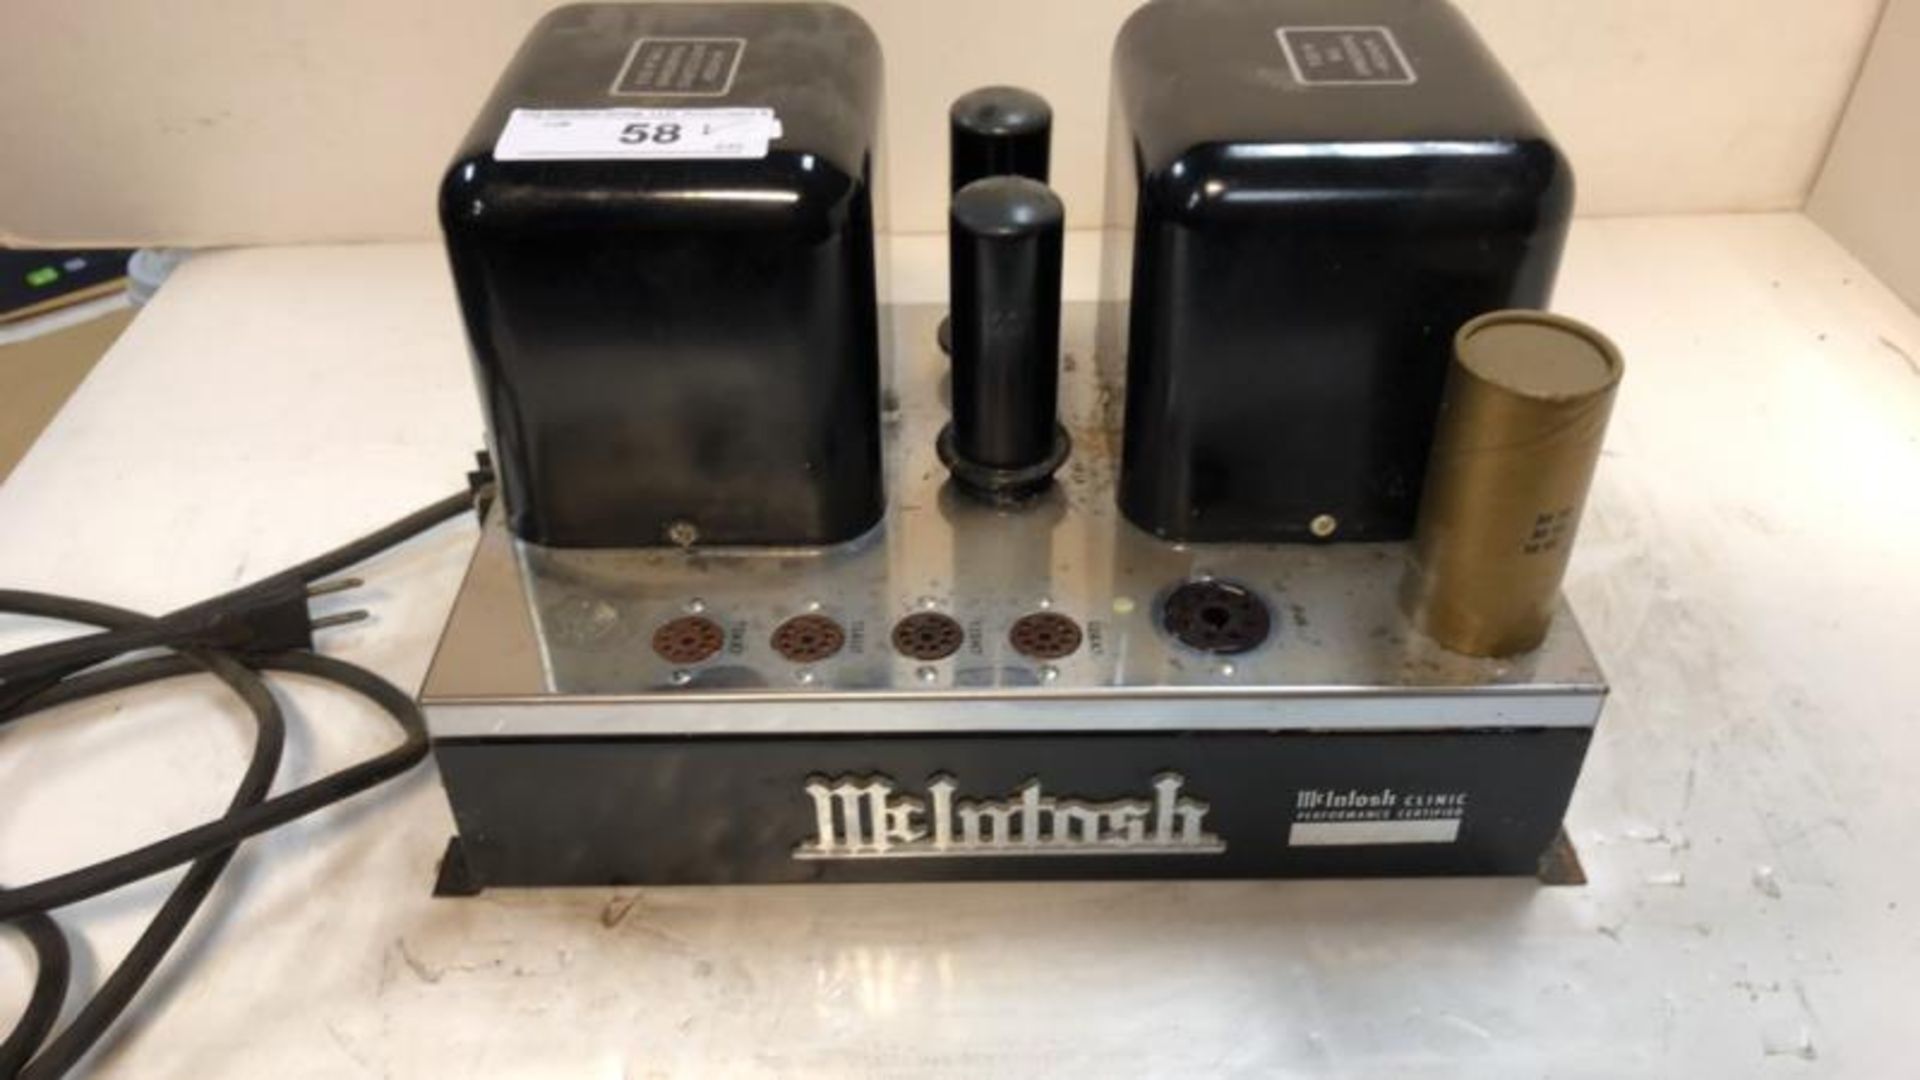 McIntosh MC 30, power transformer amp, missing tubes, pitted, tested - powers up